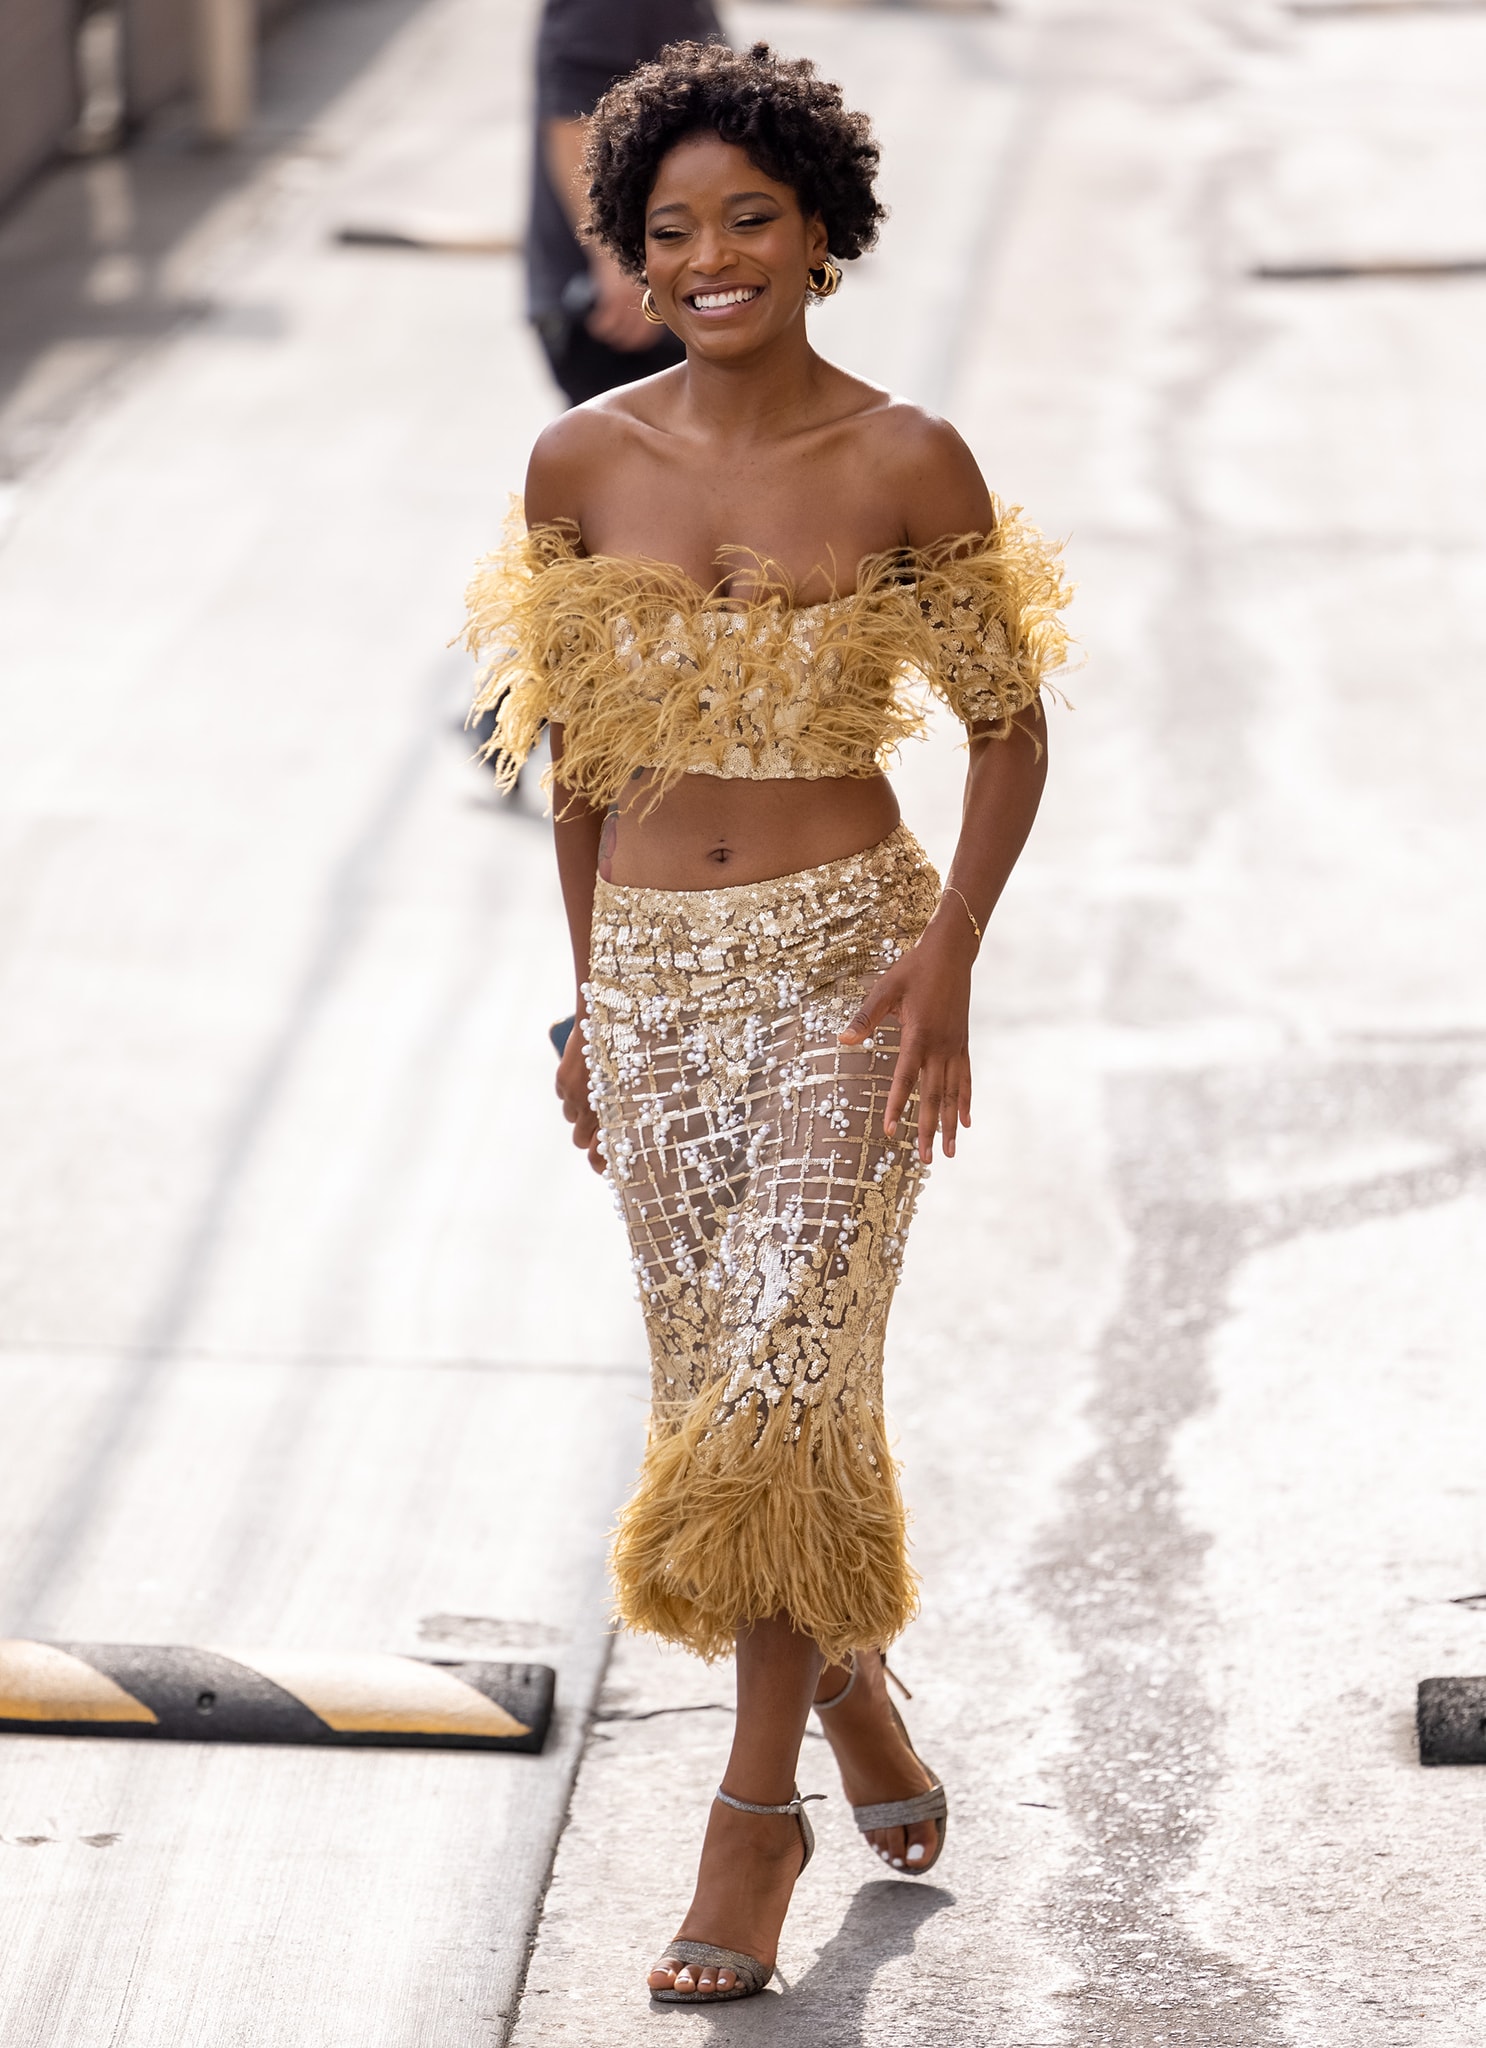 Keke Palmer puts her slim figure and belly button on display in a gilded Georges Chakra ensemble